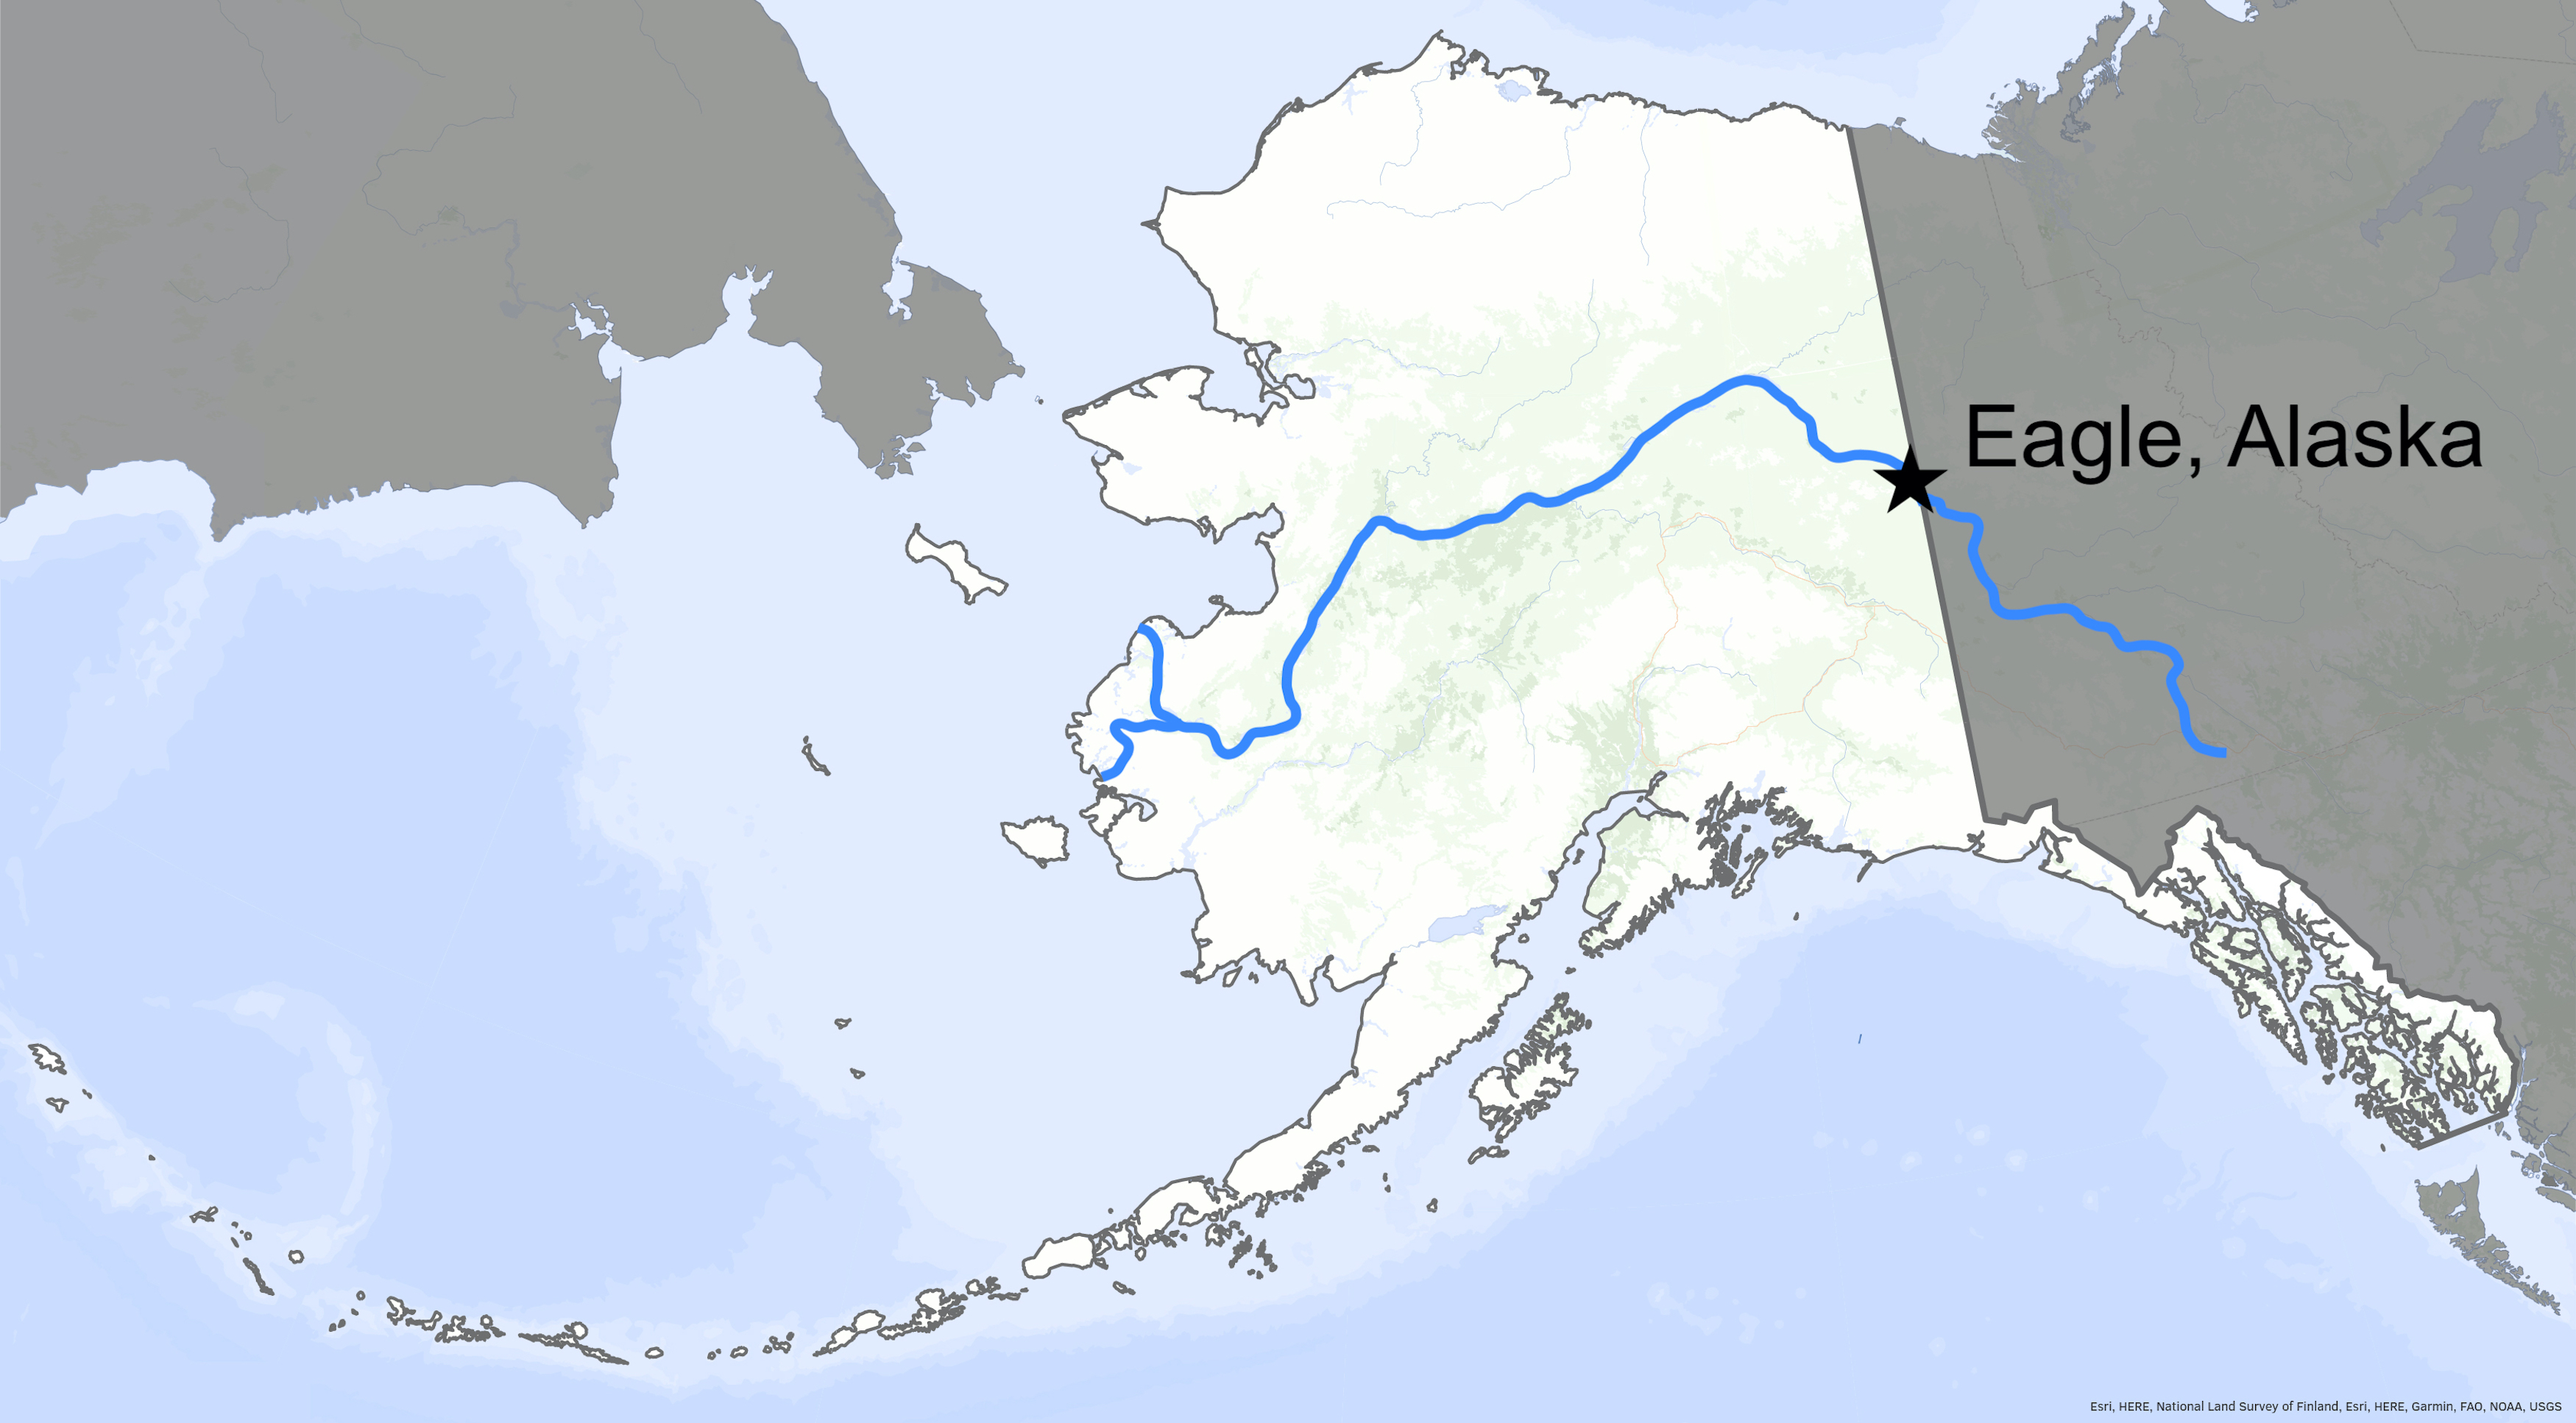 A map of Alaska shows the location of Eagle with a star and the Yukon River with a blue line.